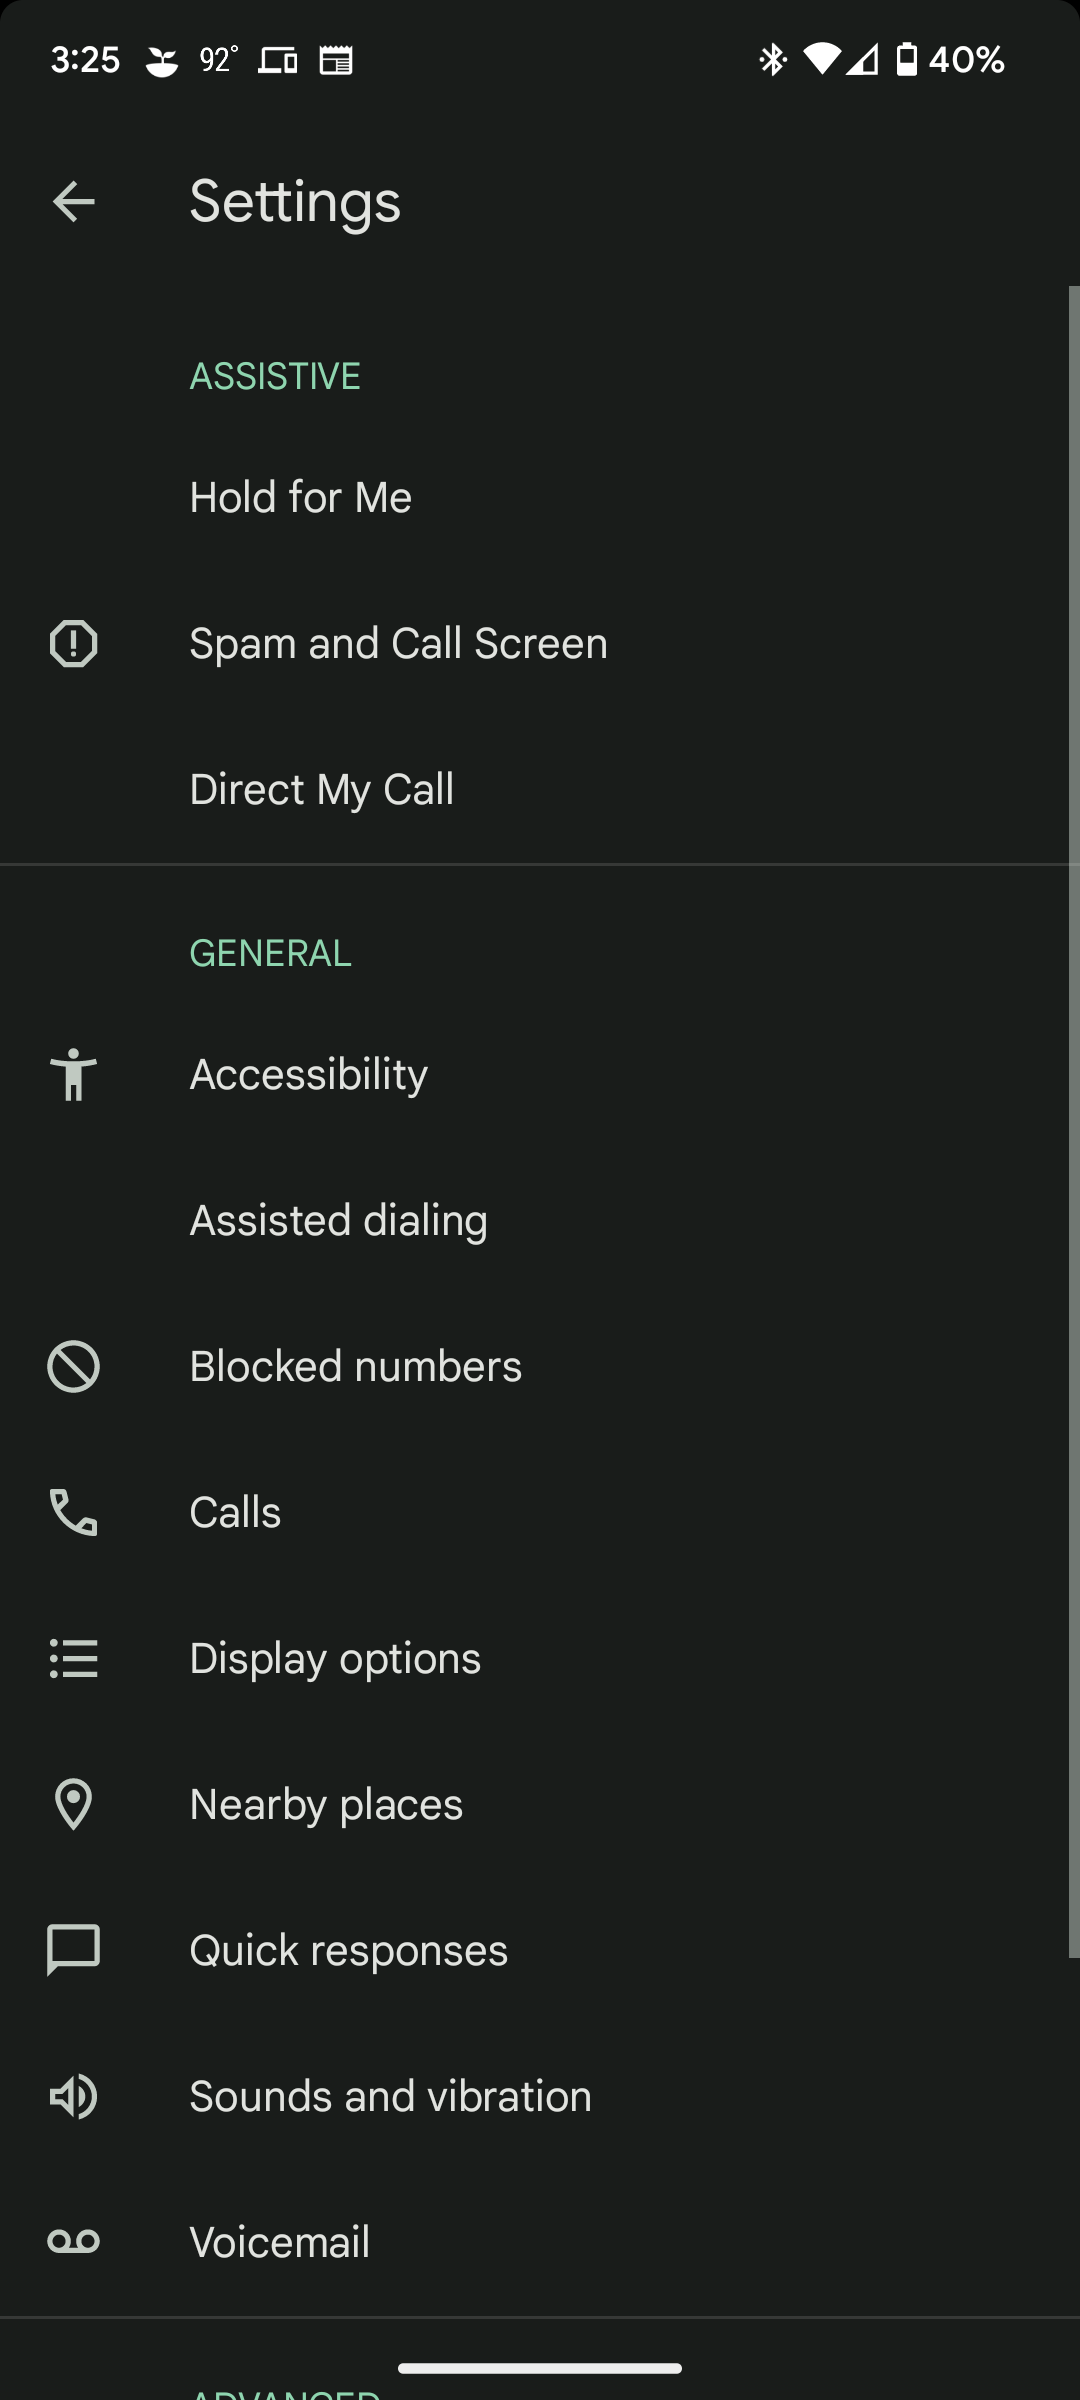 The Google Phone app Settings page